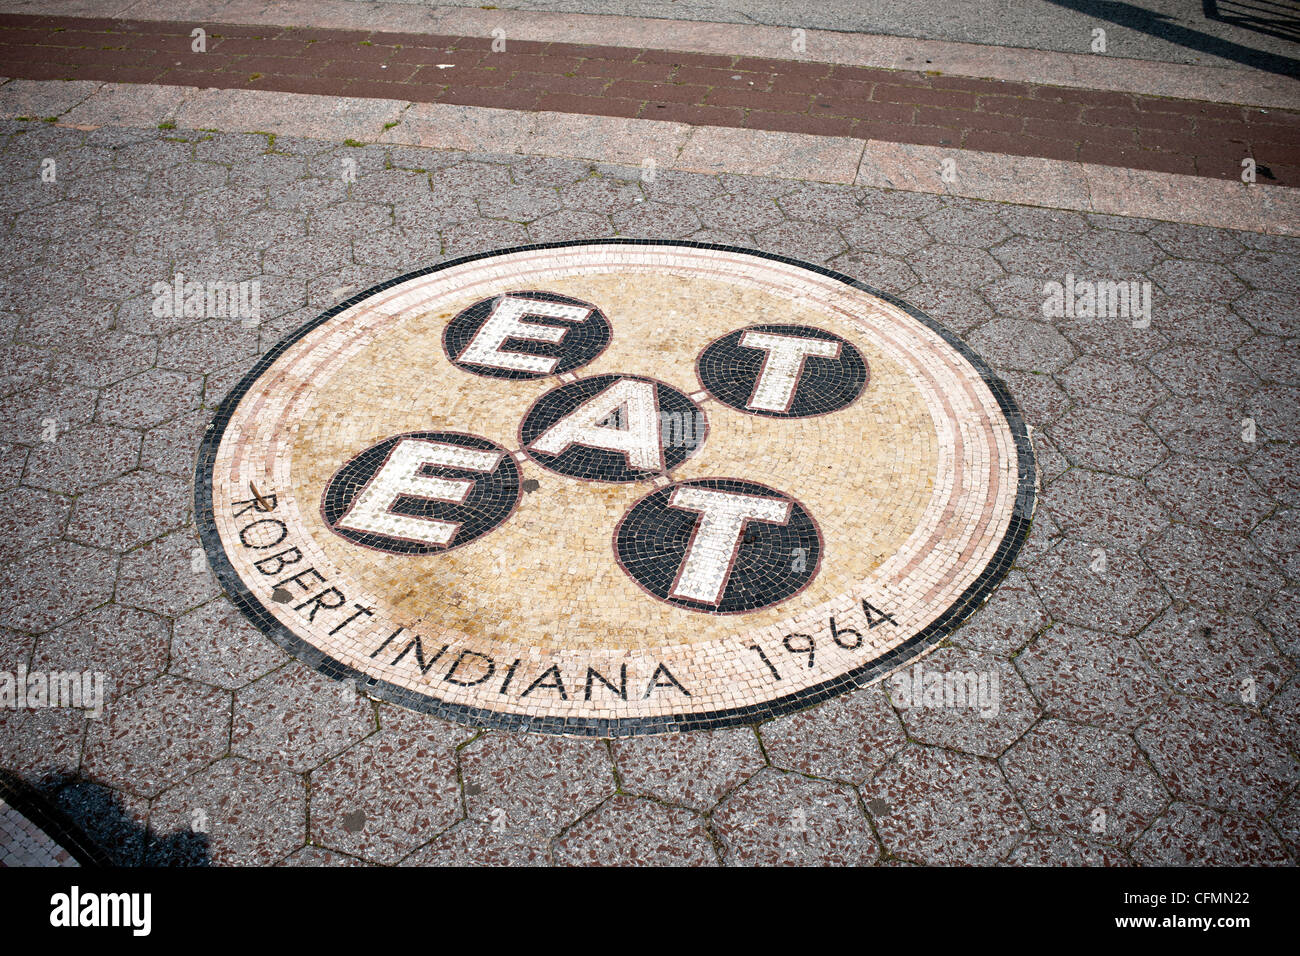 A mosaic by the artist Robert Indiana embedded into the surface of Passarelle Plaza in Flushing Meadows Park in Queens in NY Stock Photo